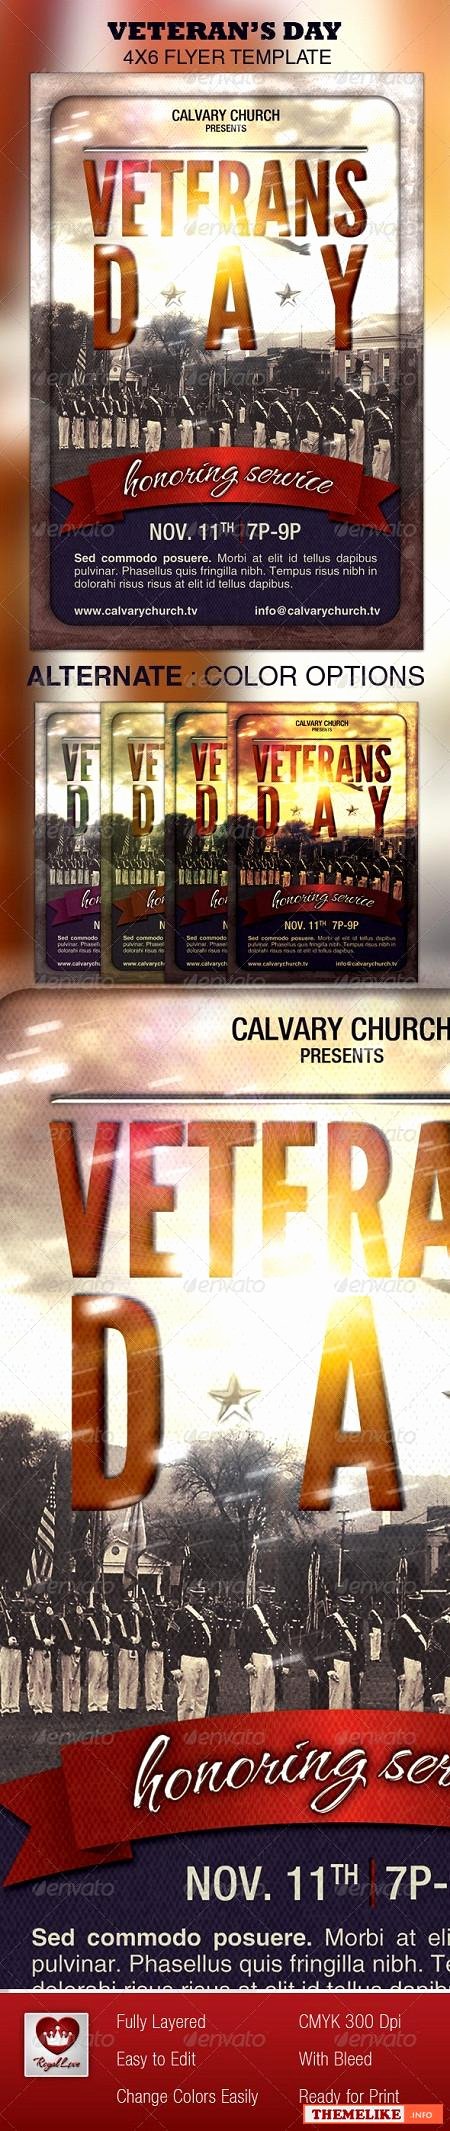 Veterans Day Flyer Template Free Luxury Veterans Day Psd Flyer Template All Design Template